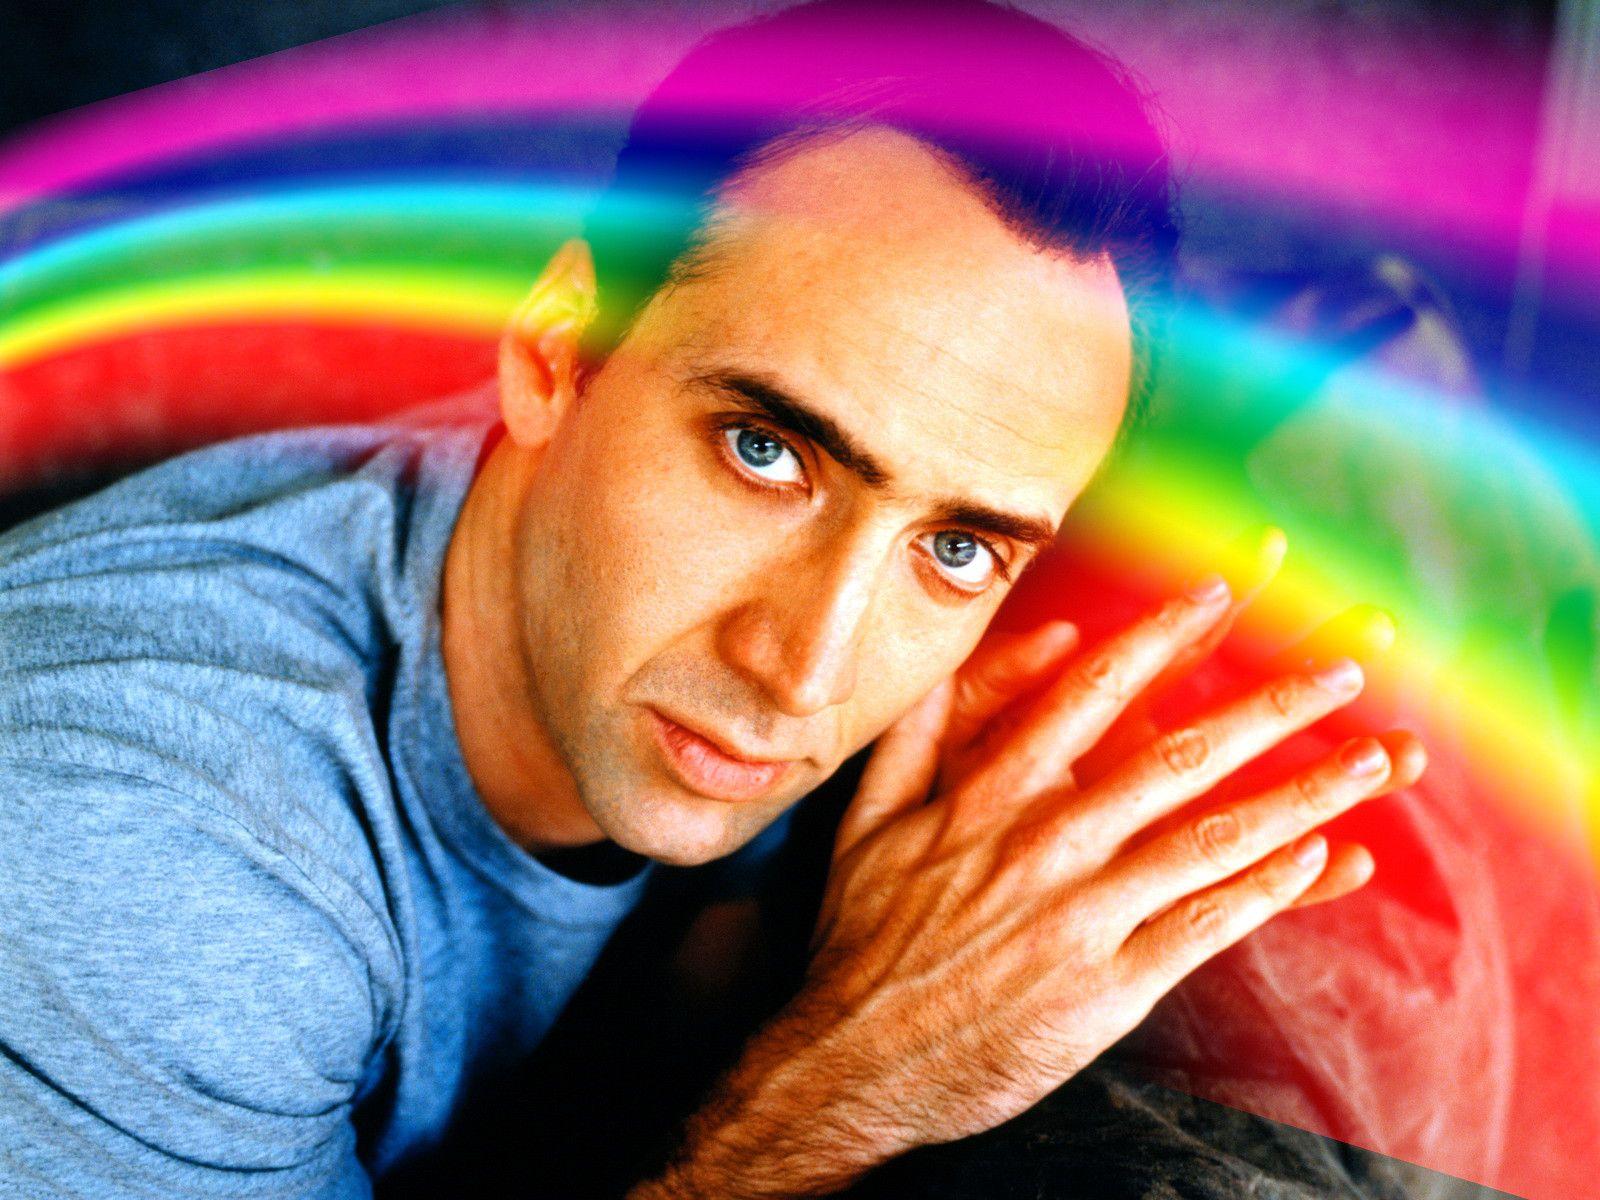 The original of the Nic Cage desktop posted yesterday, from